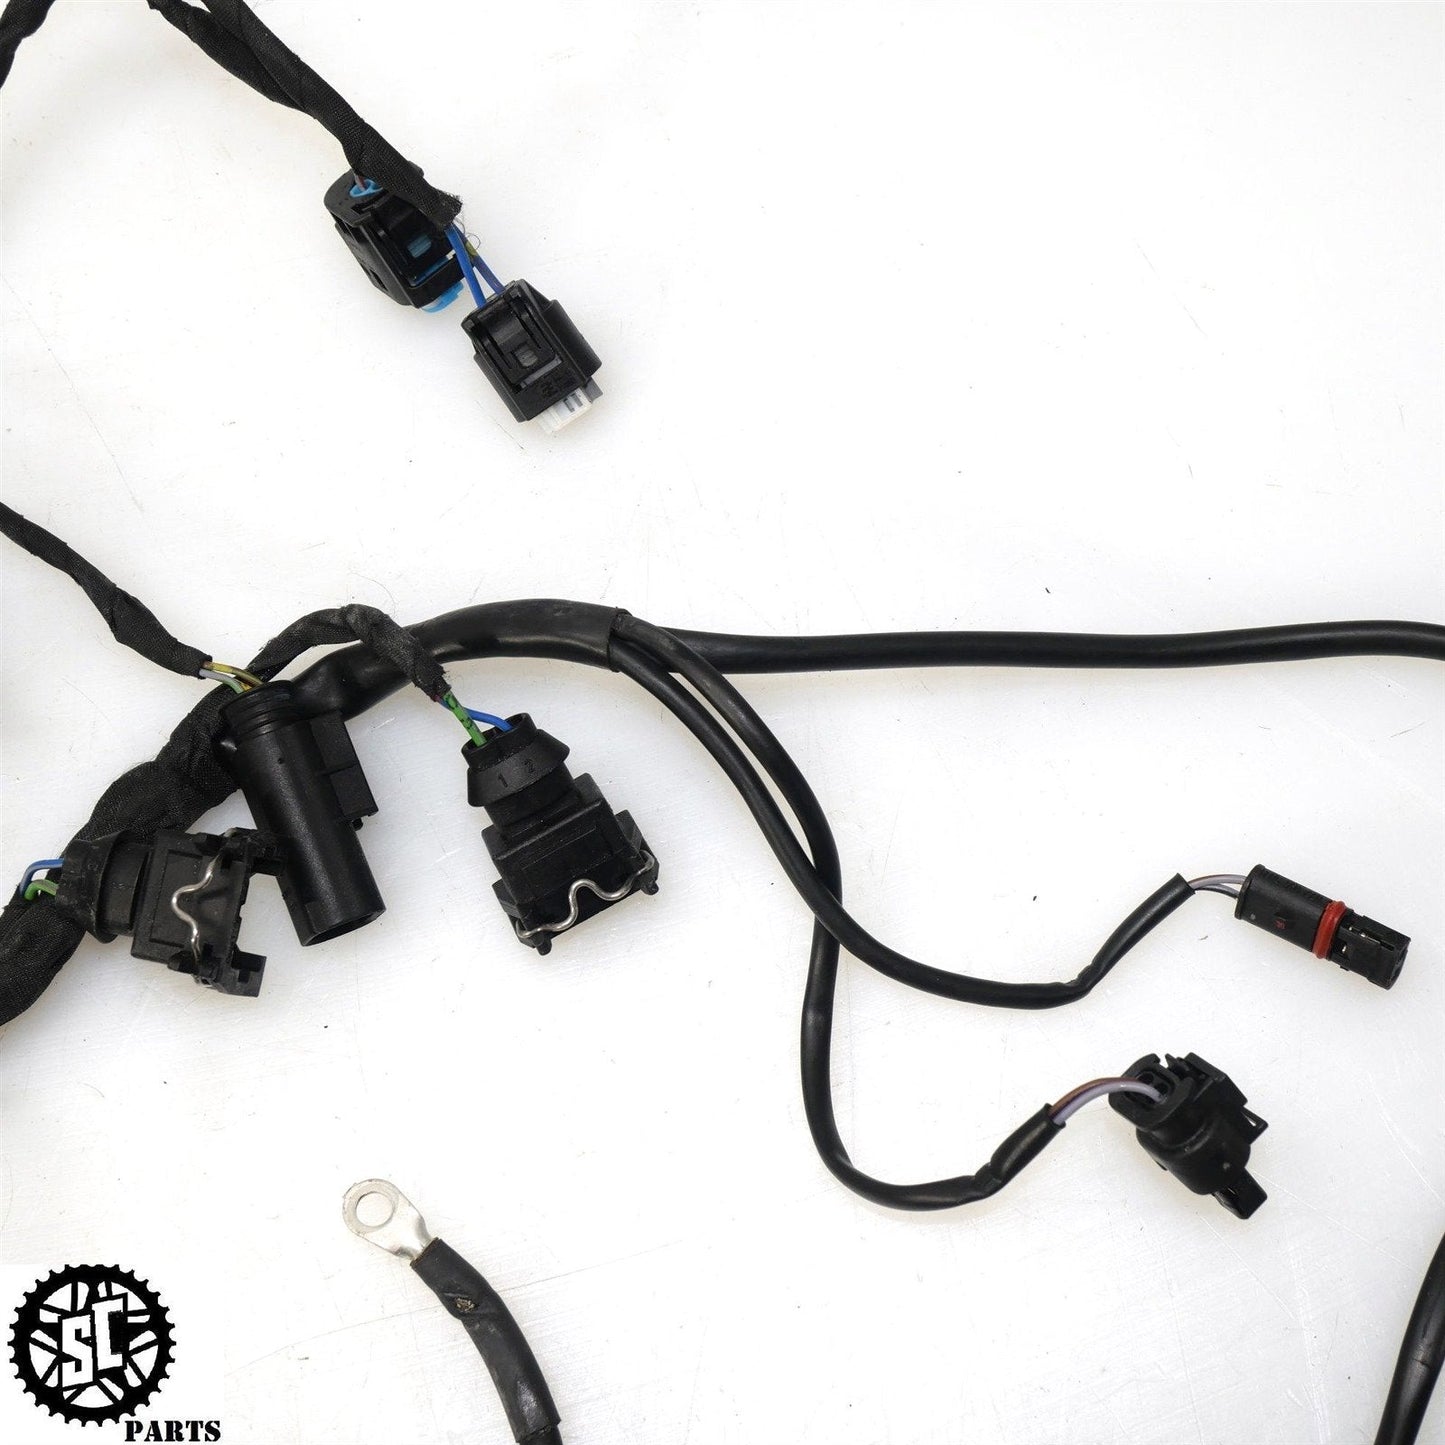 2010-2014 BMW S1000RR FUEL INJECTOR WIRING HARNESS B22